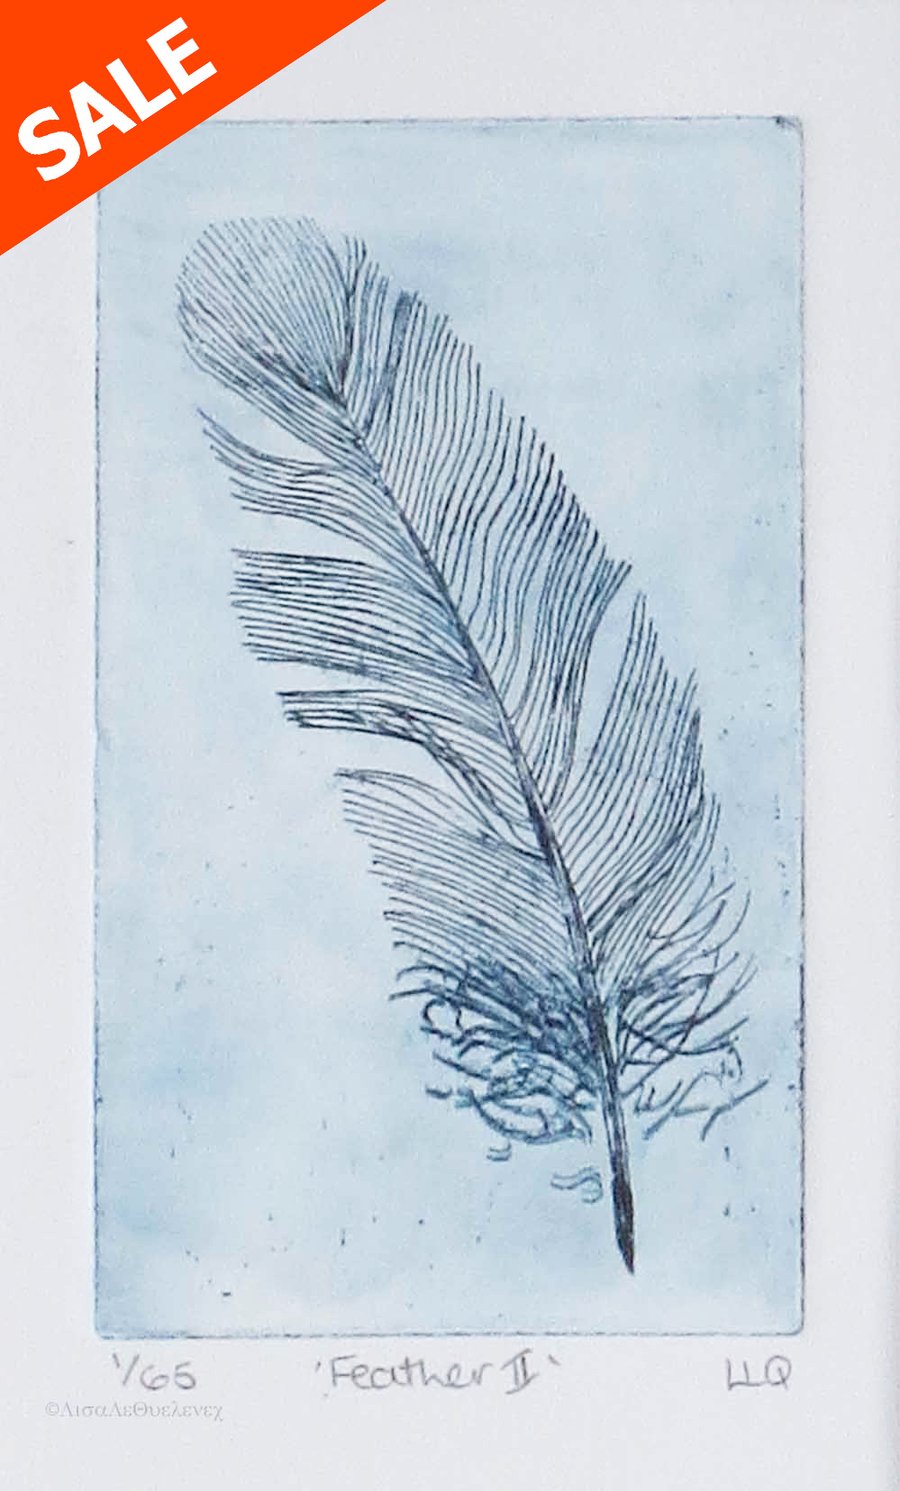 SALE feather etching print was 40 now 25 pounds